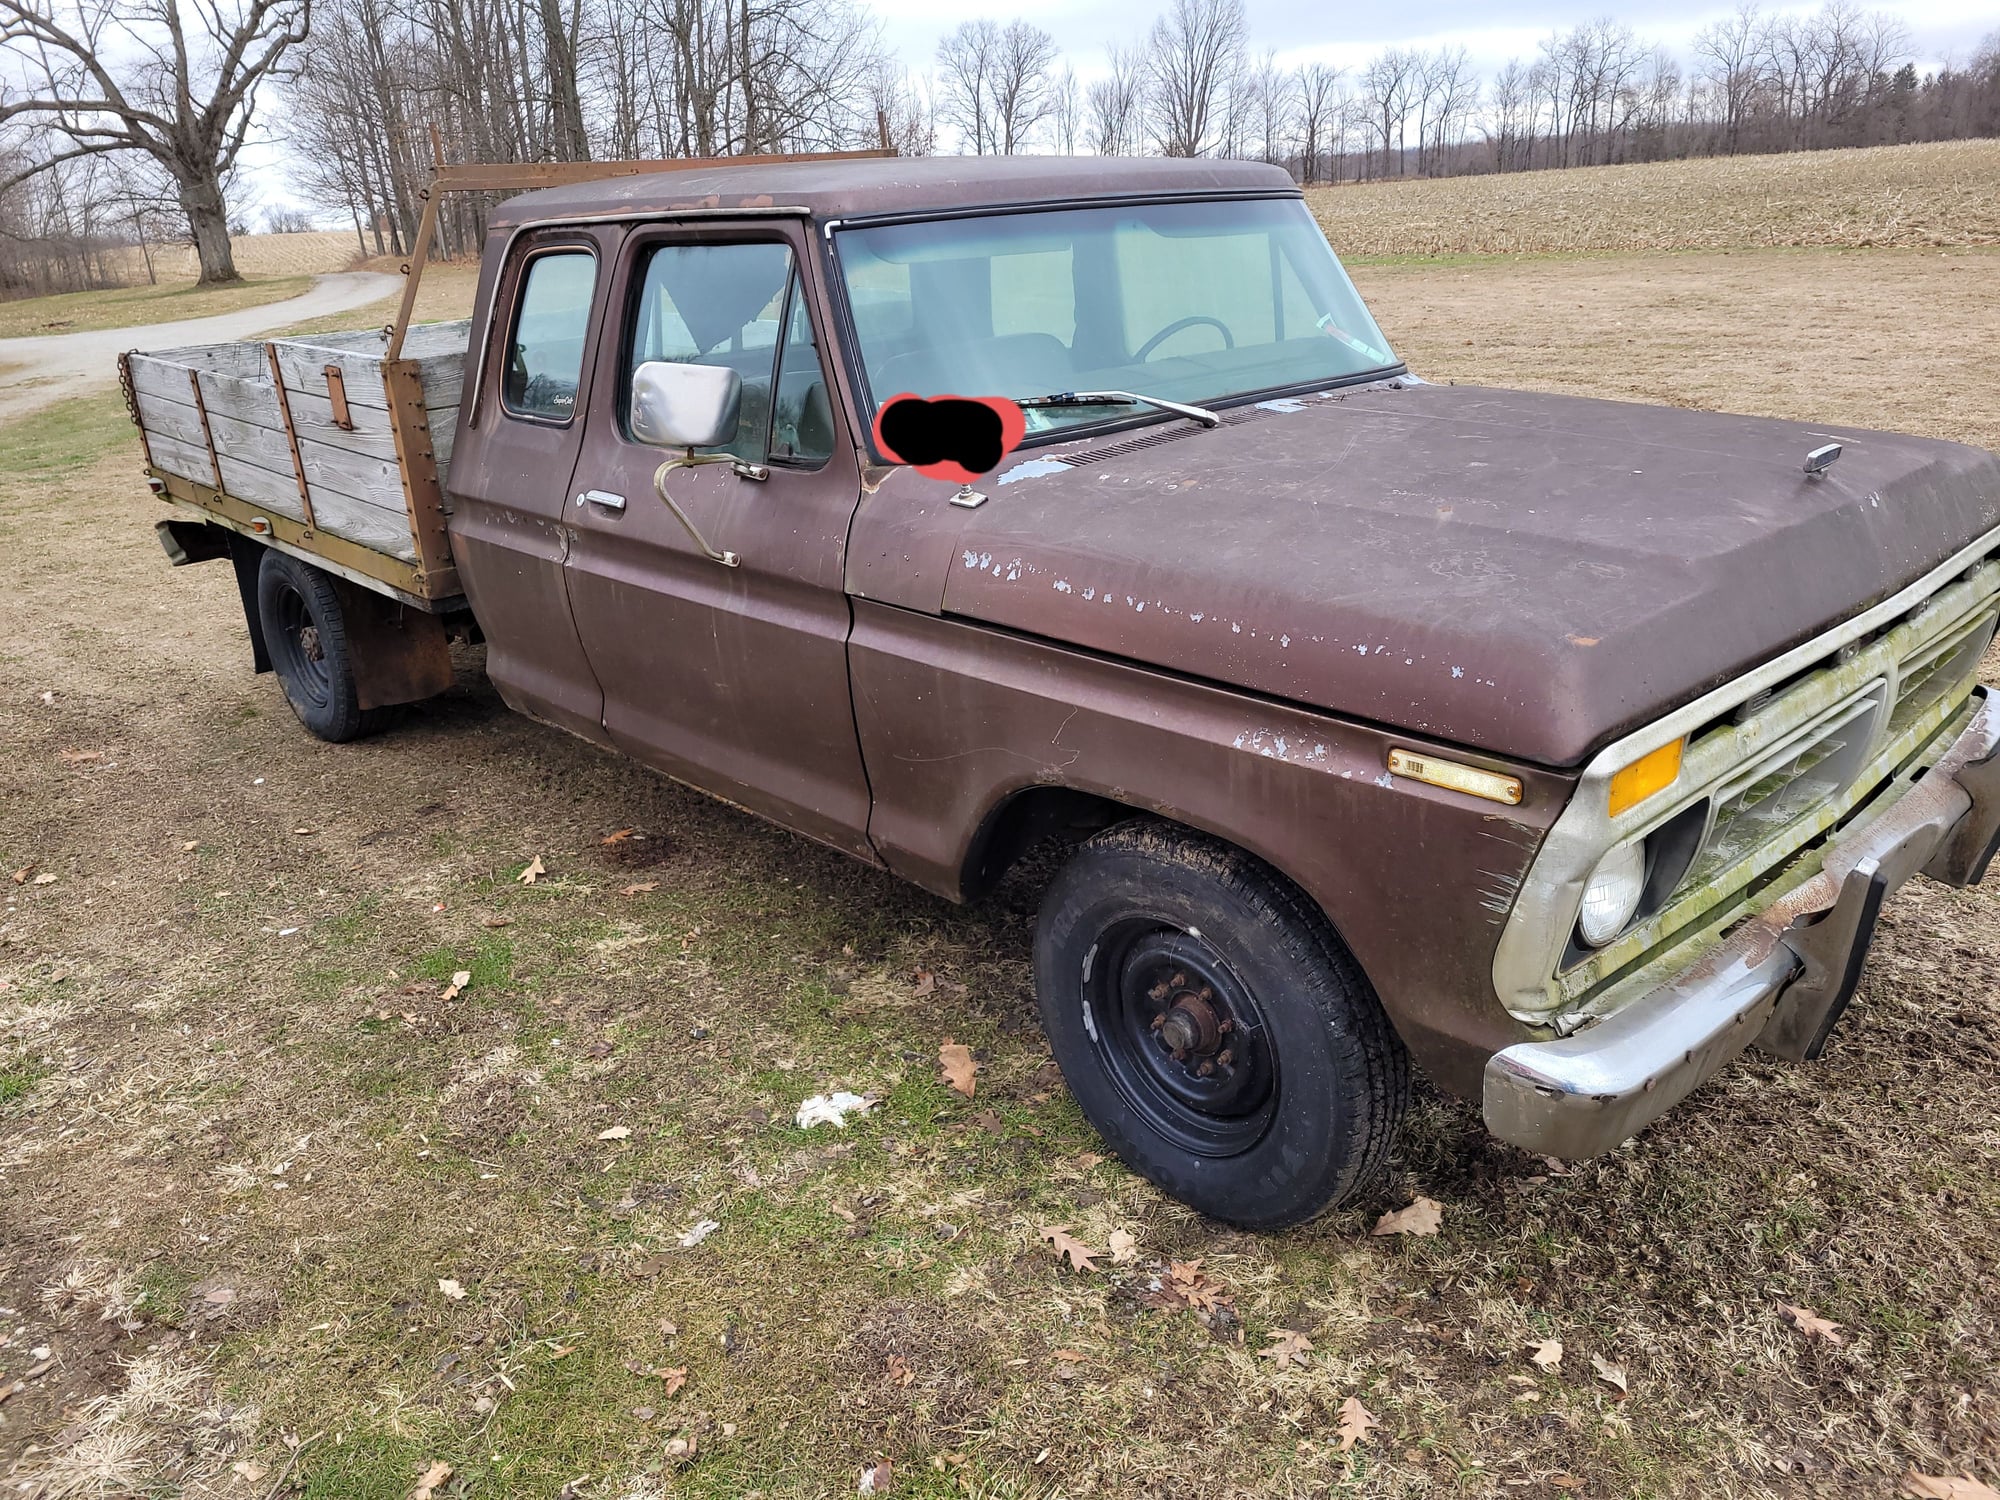 1977 Ford F-250 - 77 f250 super cab - Used - VIN X25sky44591 - 8 cyl - 2WD - Automatic - Truck - Brown - North Fairfield, OH 44855, United States